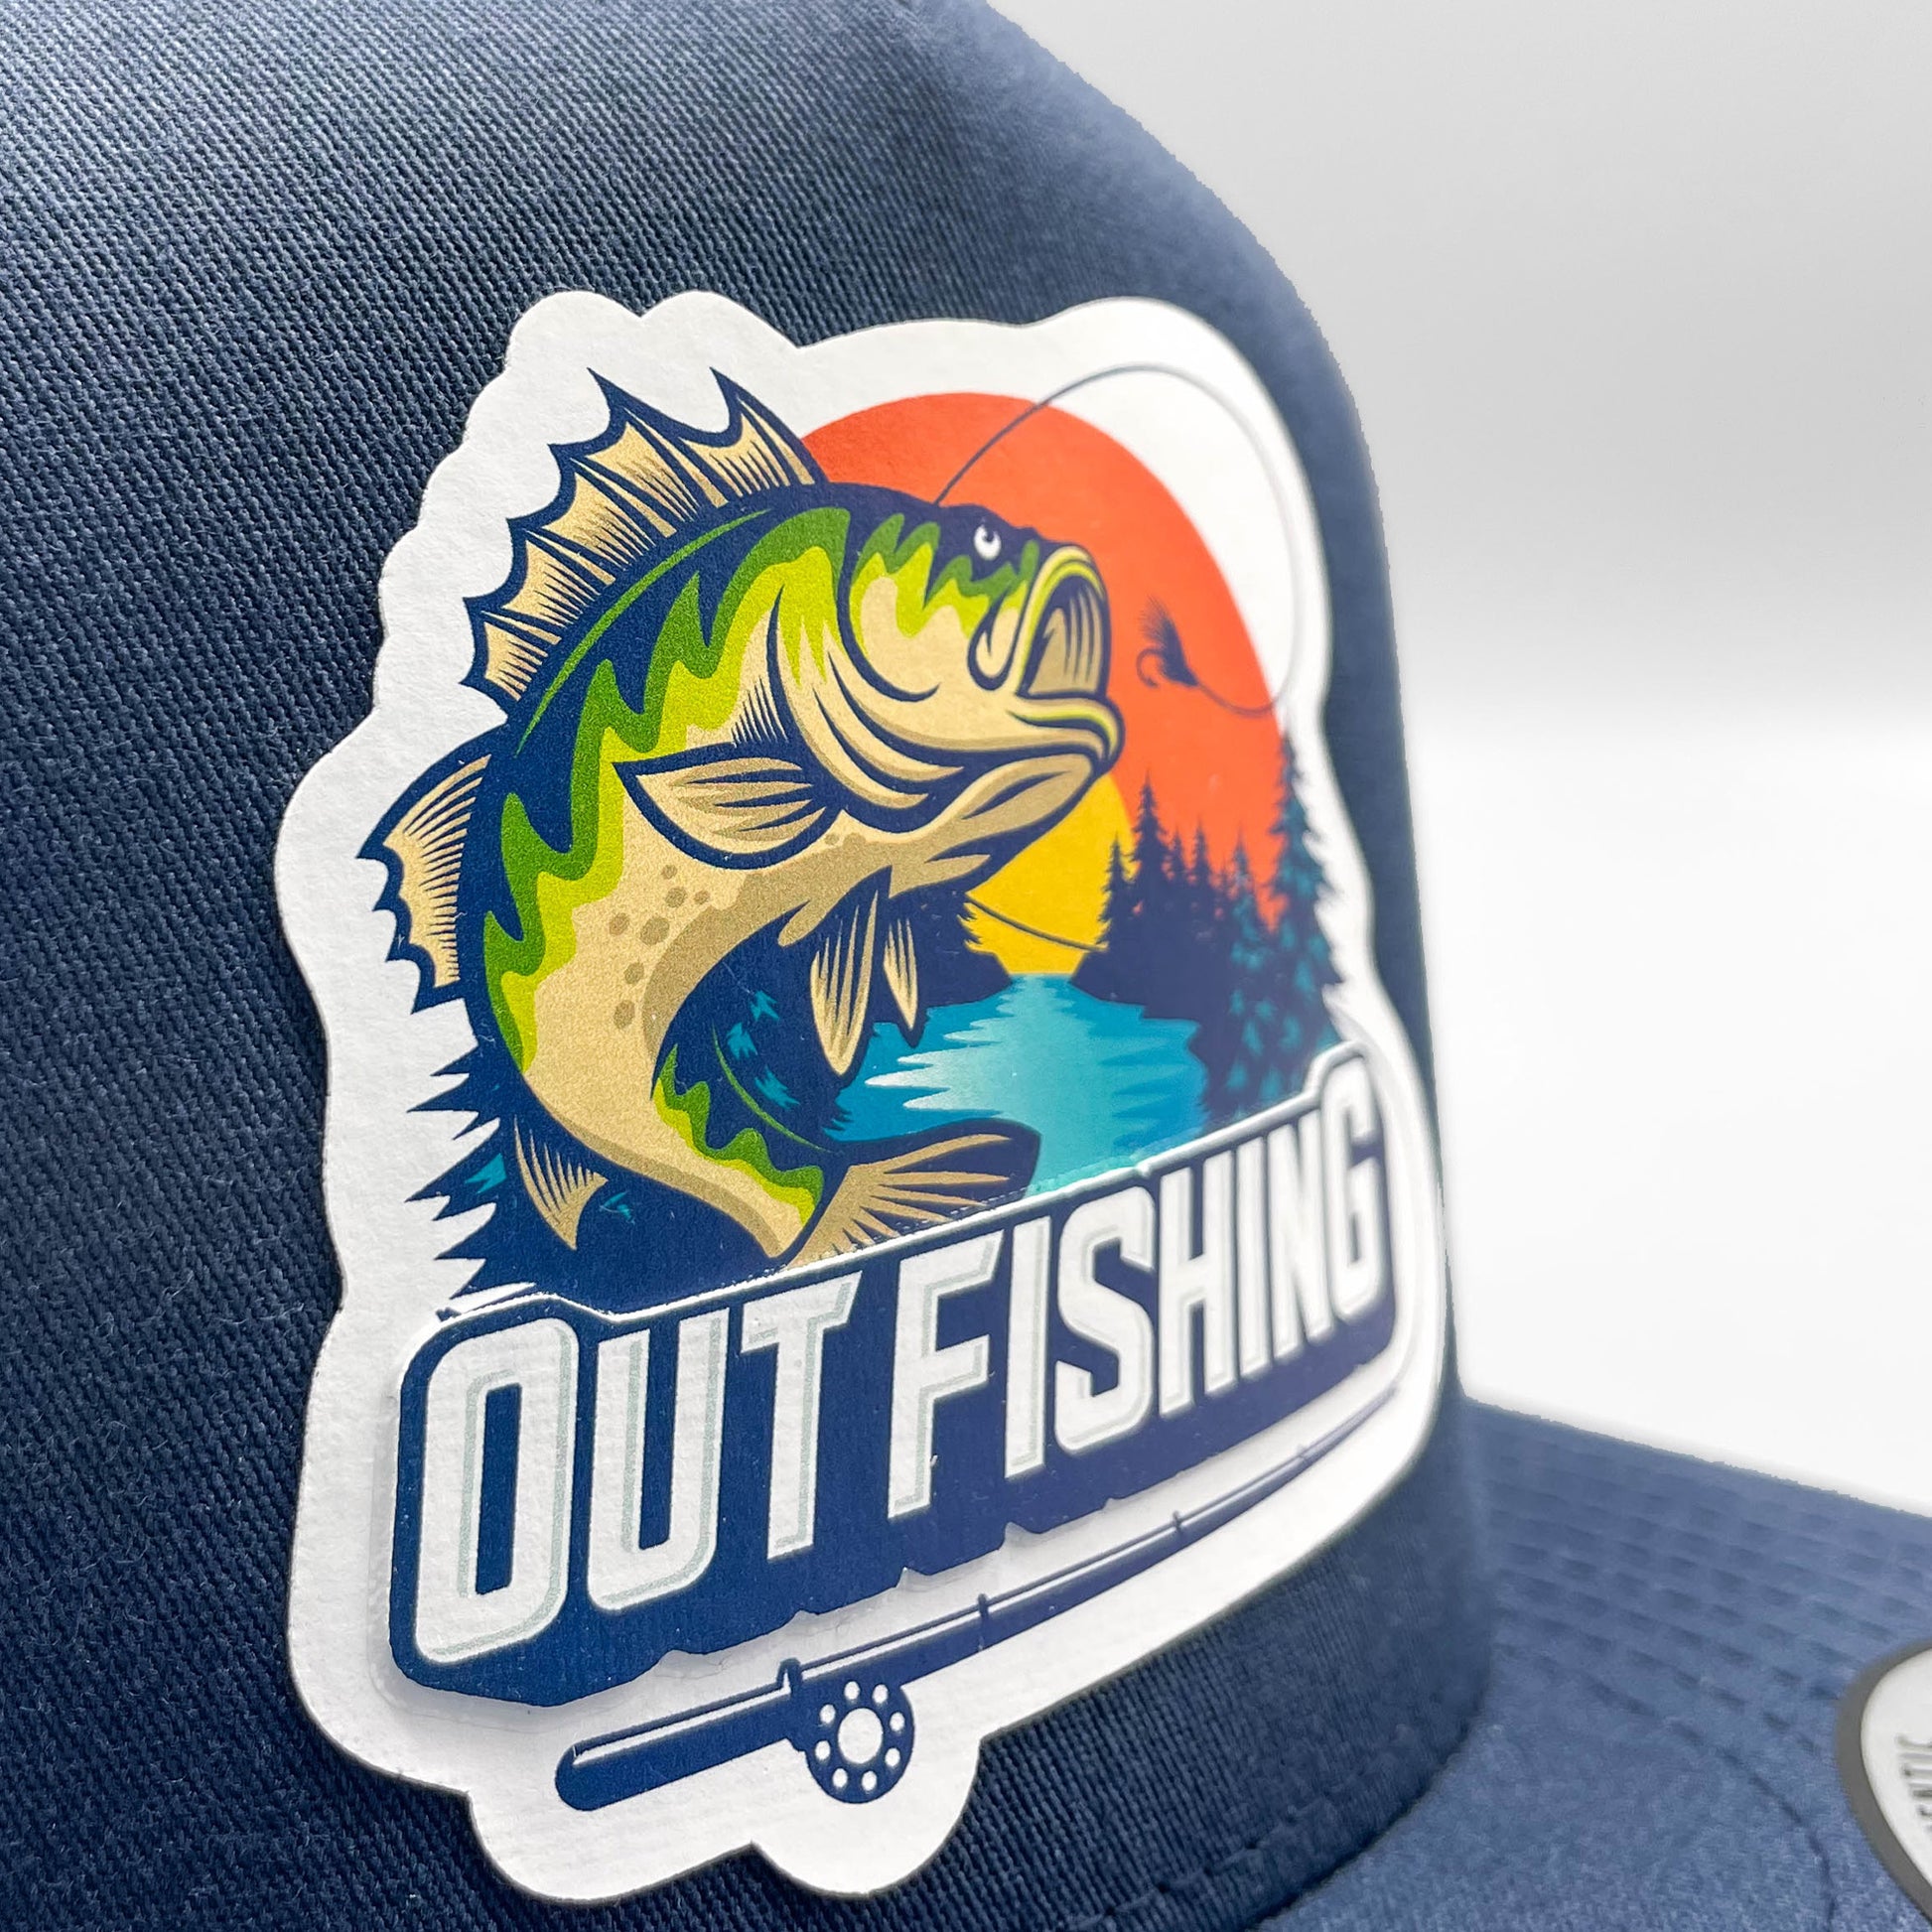 Out Bass Fishing Retro Trucker Hat, Raised Design on Navy Yupoong